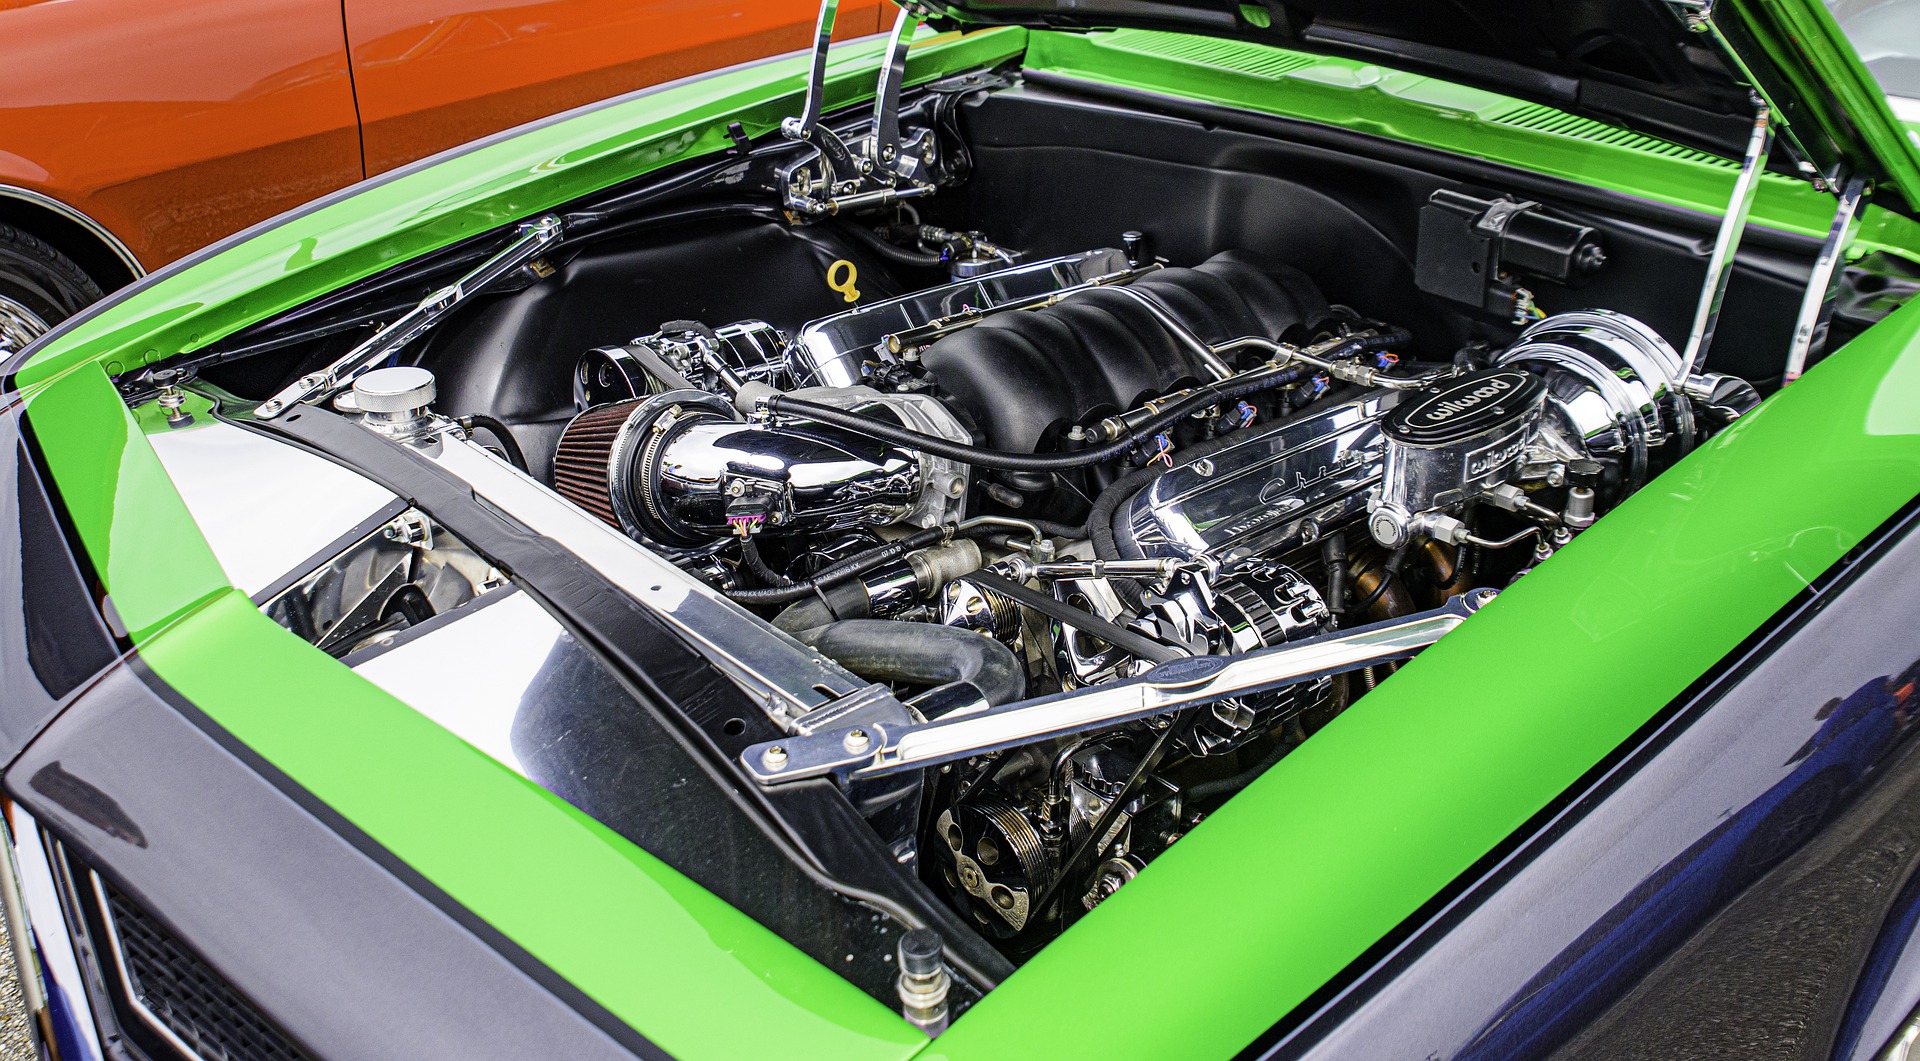 Under the hood of a Chevrolet sports vehicle